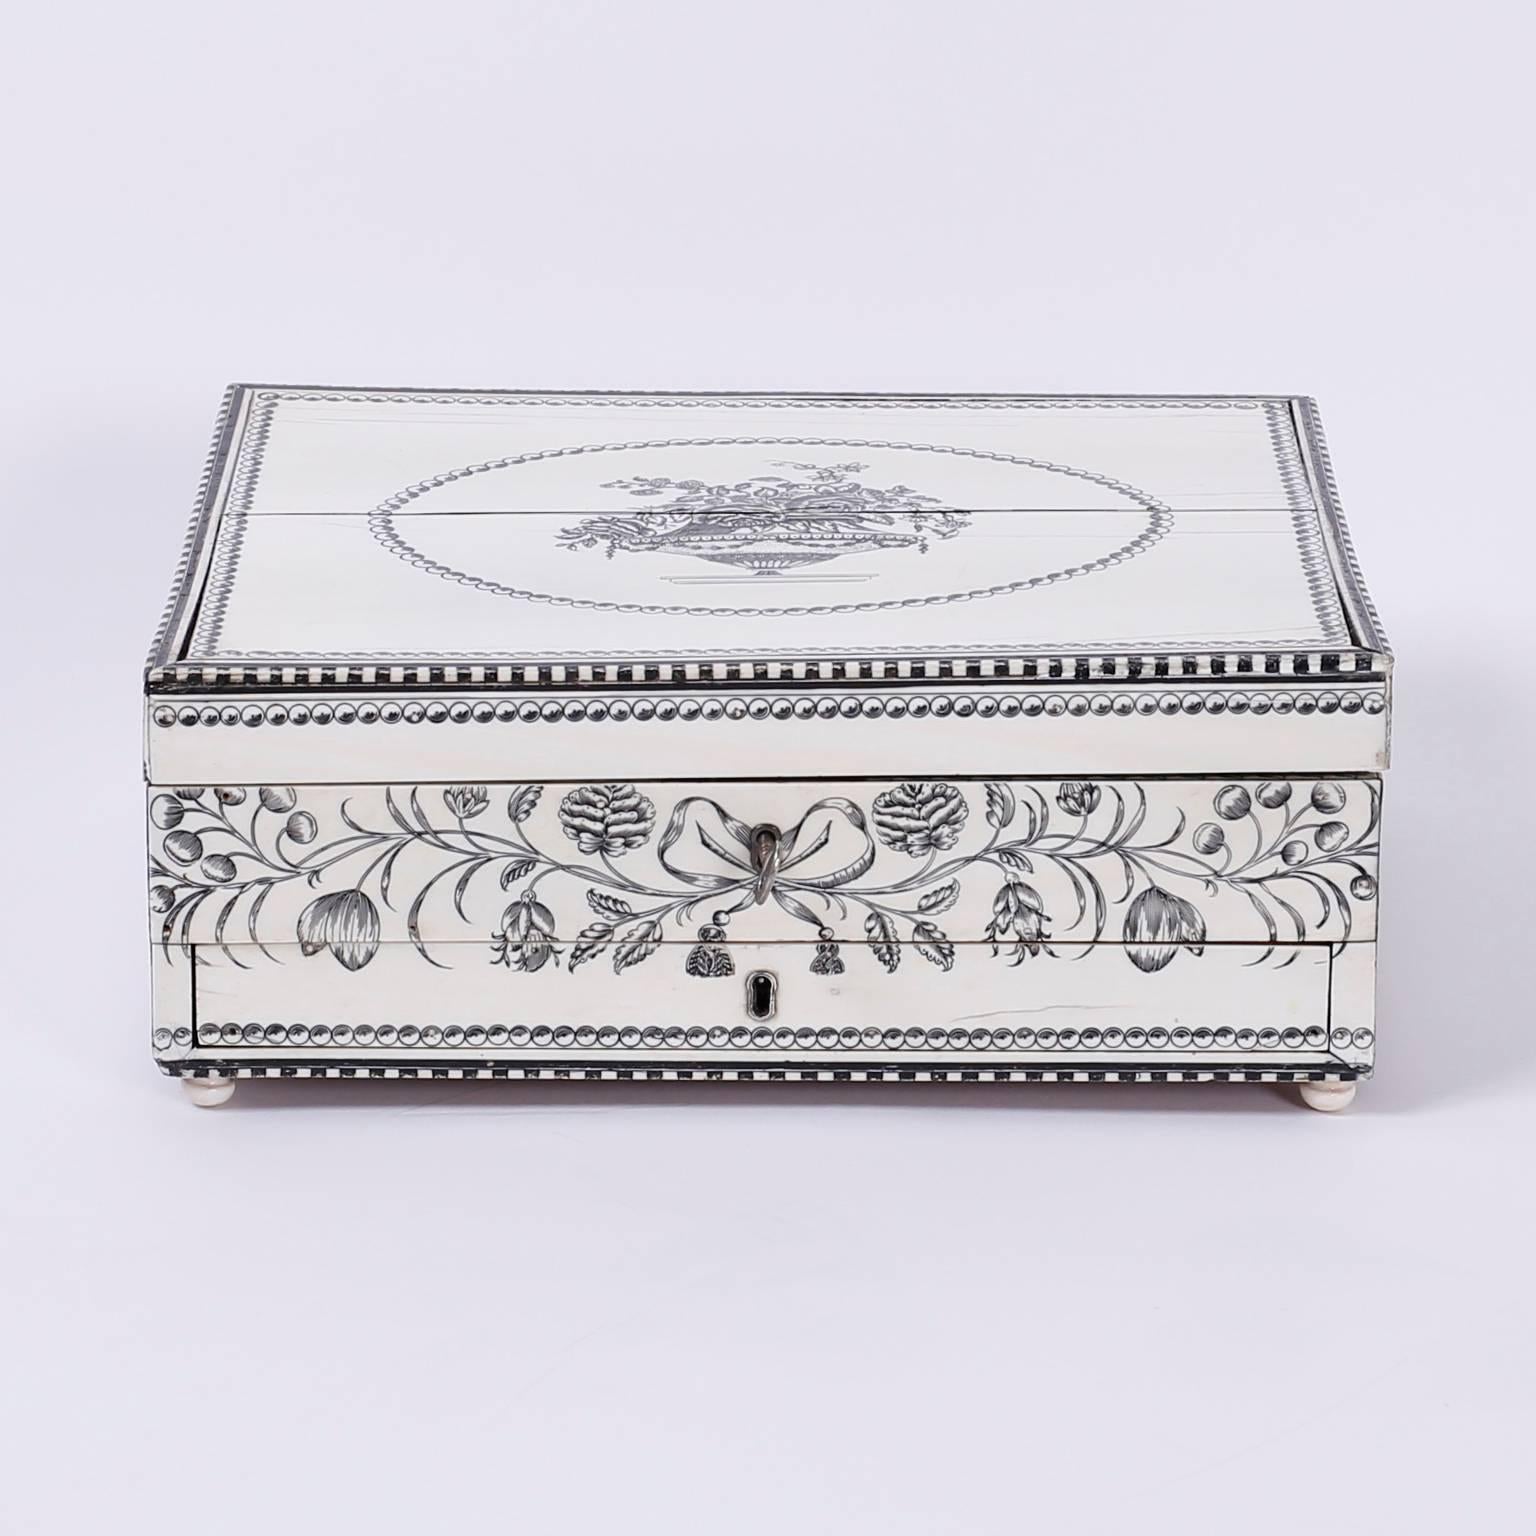 Antique, Anglo Indian sewing box crafted on the outside of the case with bone, meticulously engraved with floral designs and bordered with inlaid ebony. The inside of the box is lined with mahogany and has extensive engraved bone work. Small hidden